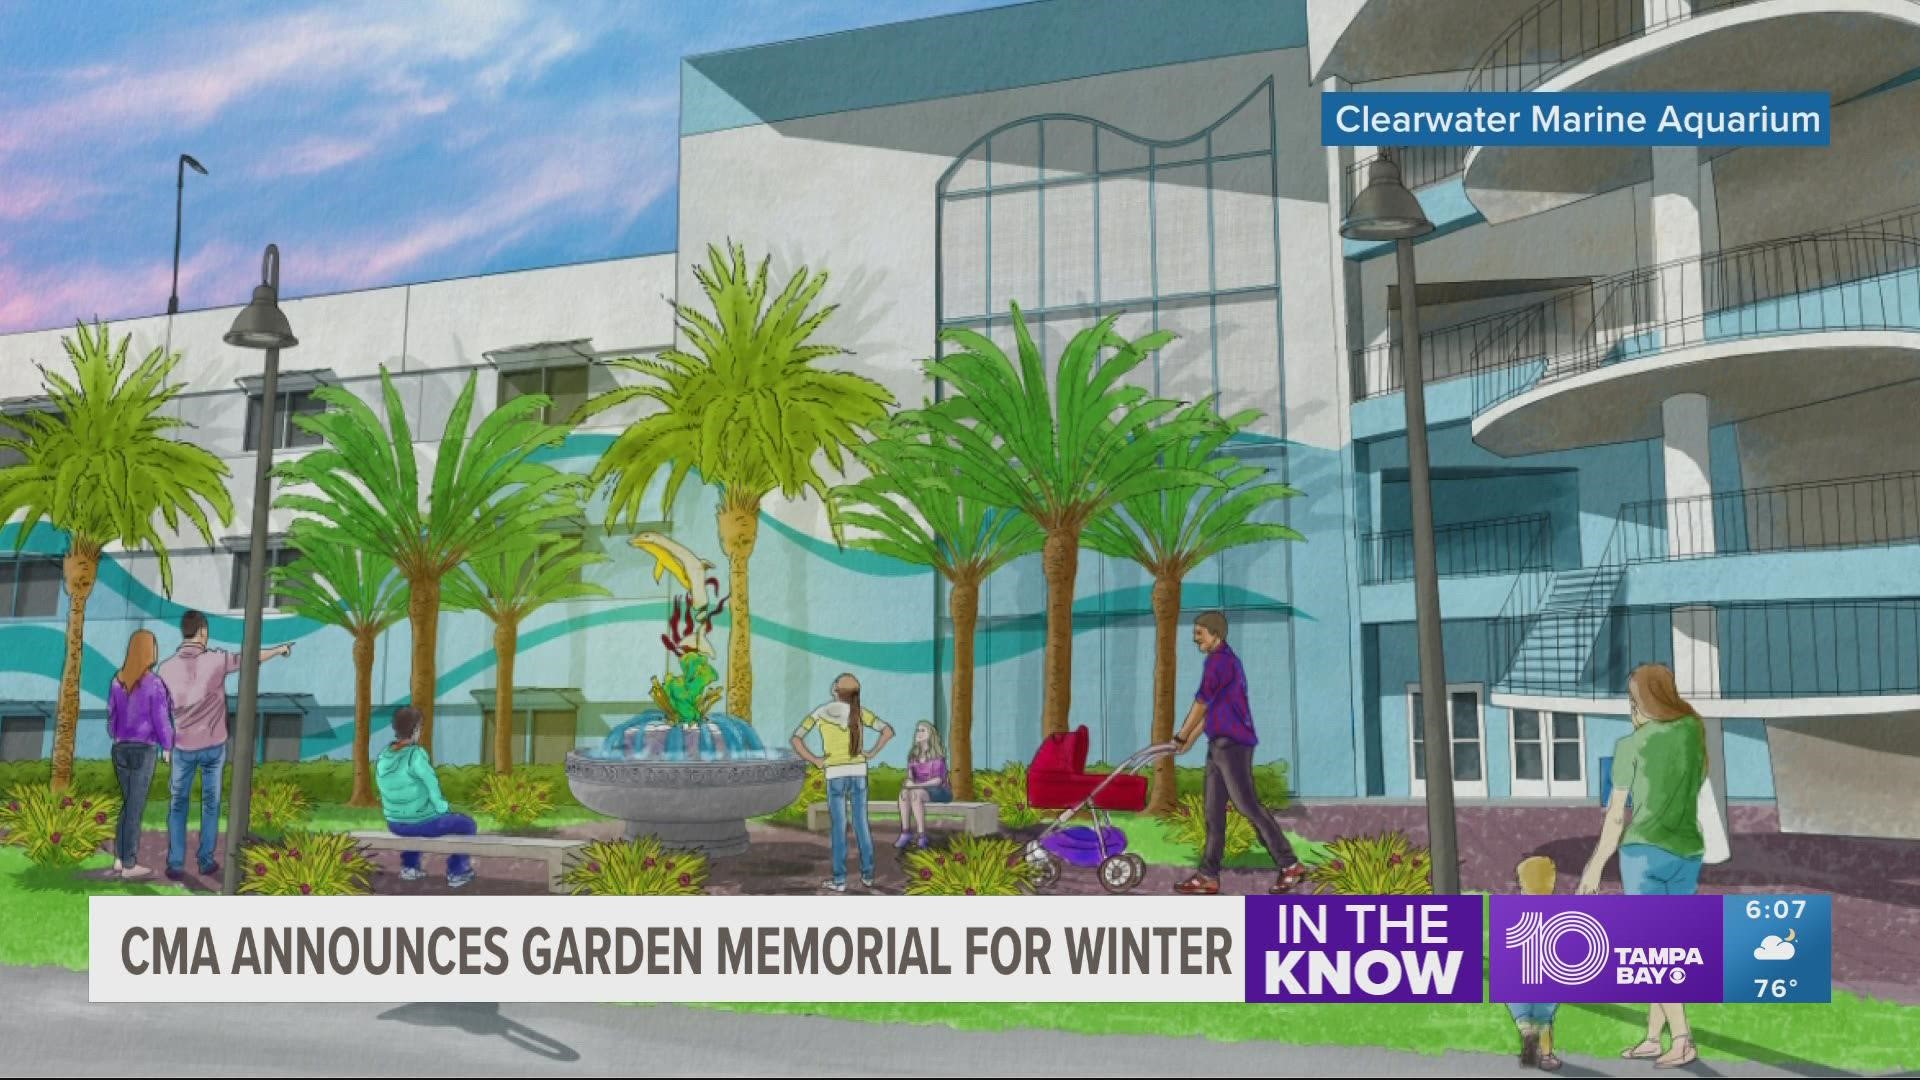 The garden will feature a statue of Winter emerging from a water fountain surrounded by sustainable Florida landscaping.